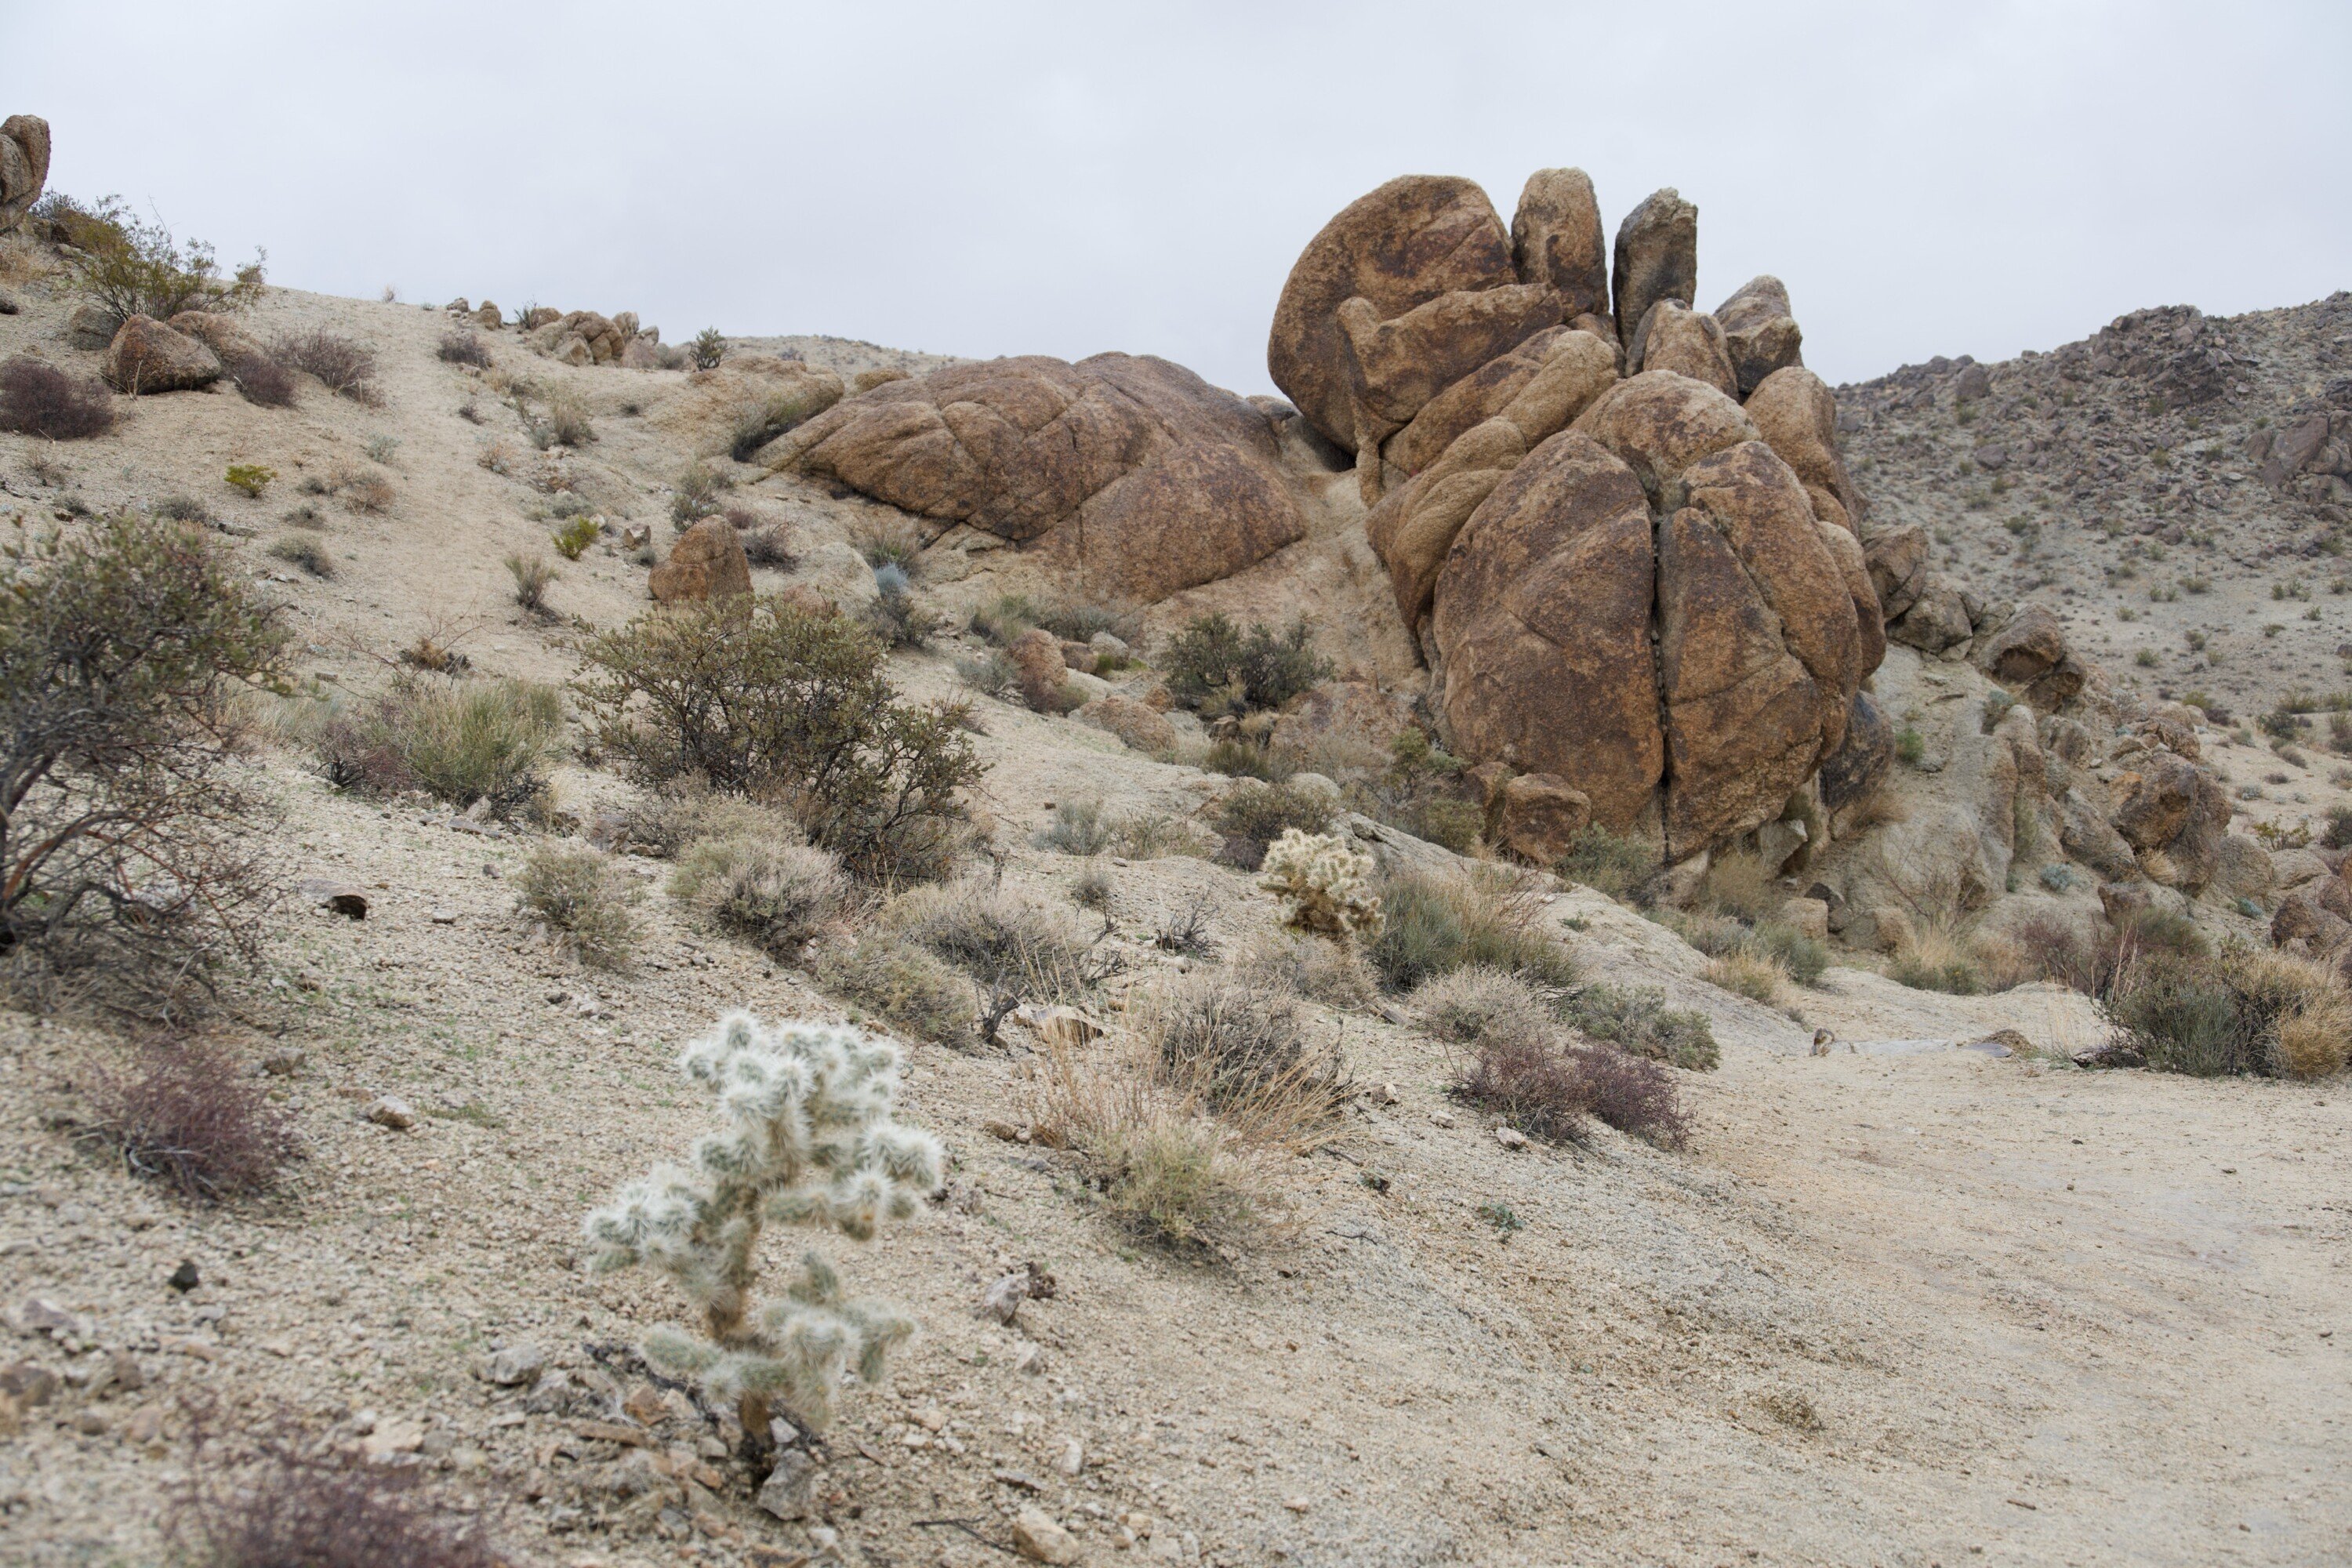 The 49 Palms Oasis Trail in Joshua Tree National Park